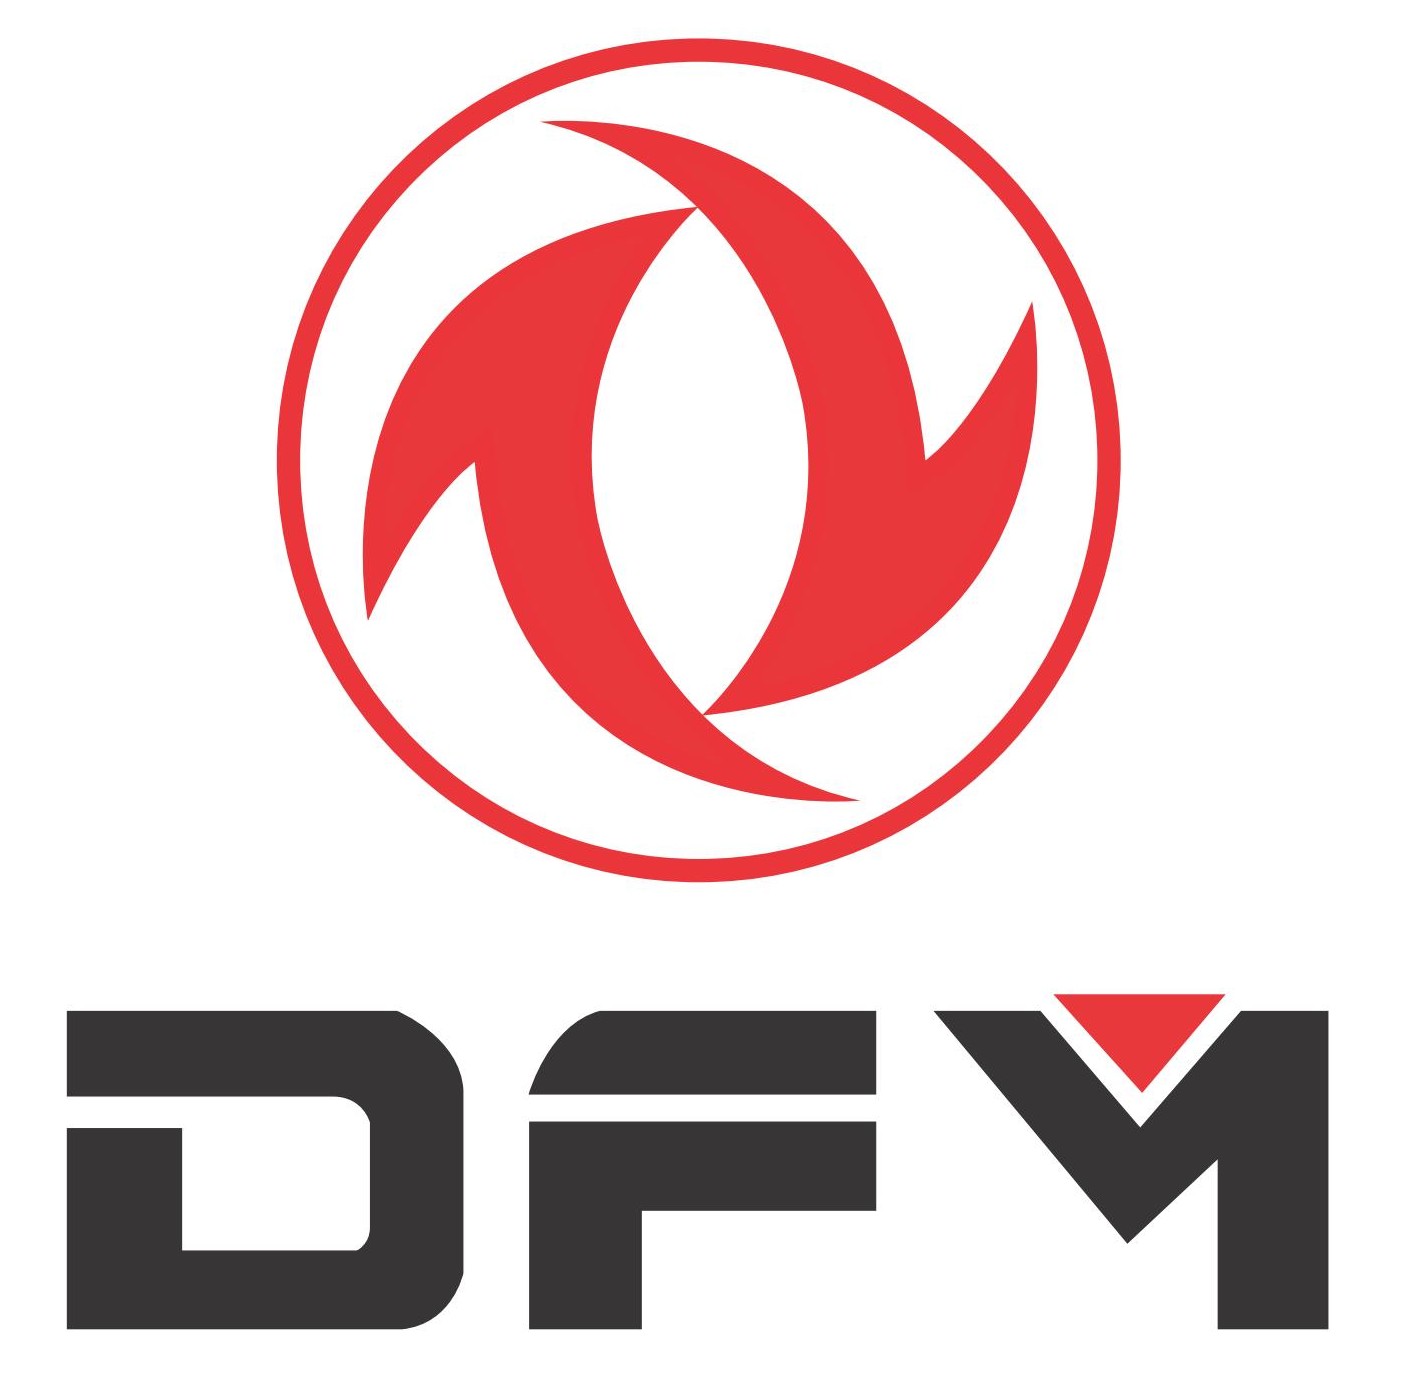 Dongfeng Motor Corporation Hdpng.com  - Dongfeng Motor, Transparent background PNG HD thumbnail